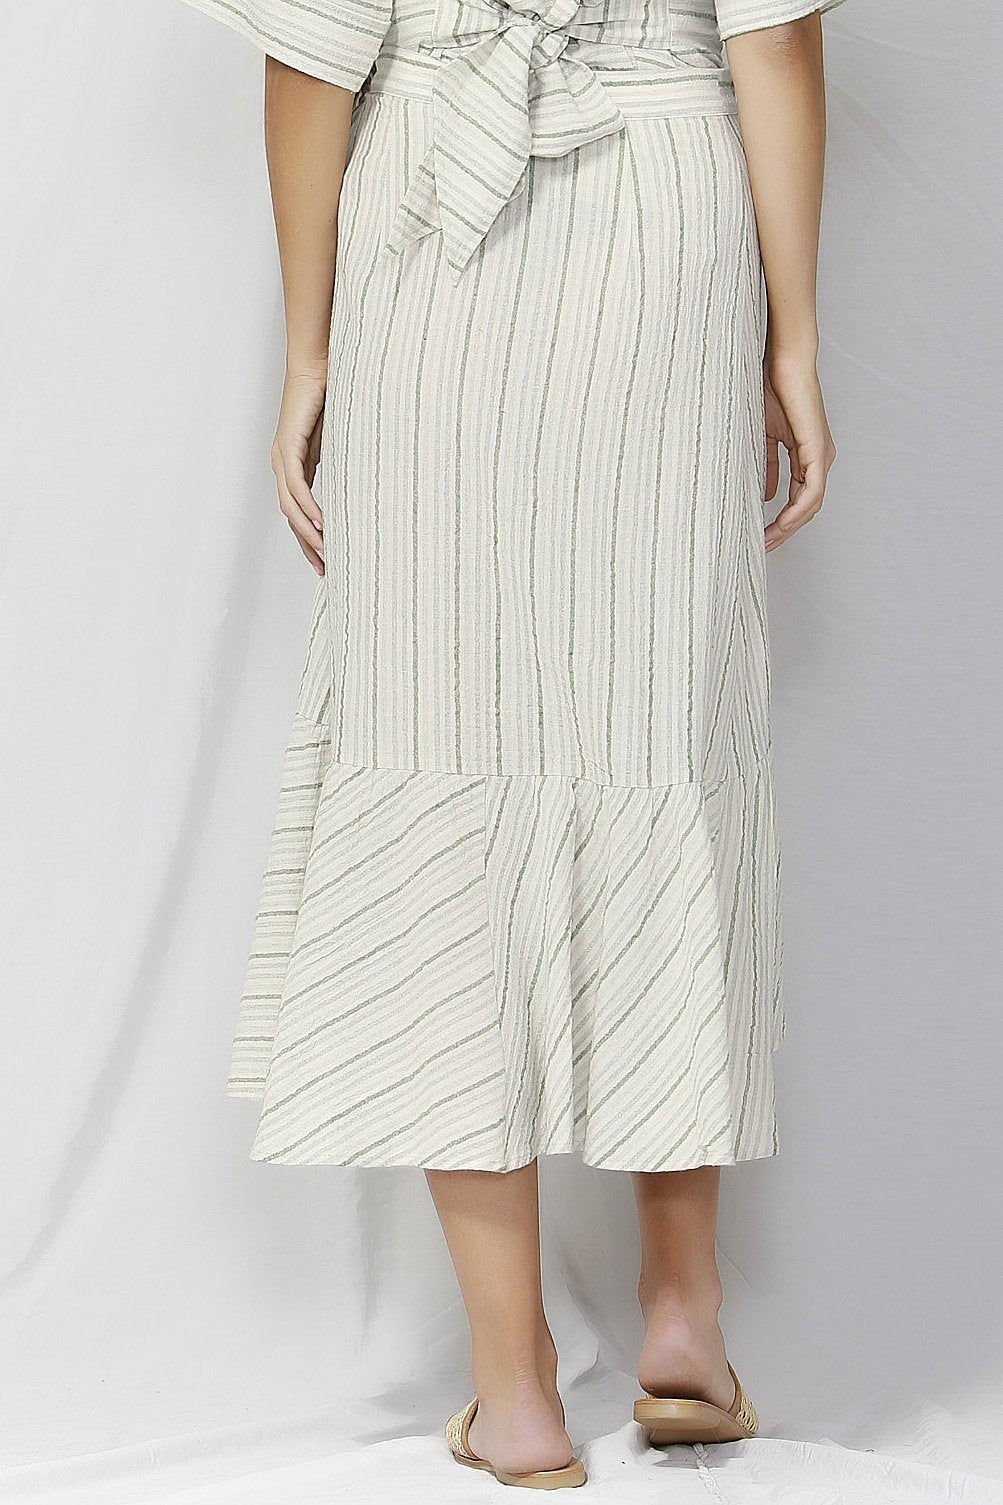 Fate + Becker Naples Linen Frilled Skirt in Stripe SIZE 8 and 10 ONLY - Hey Sara